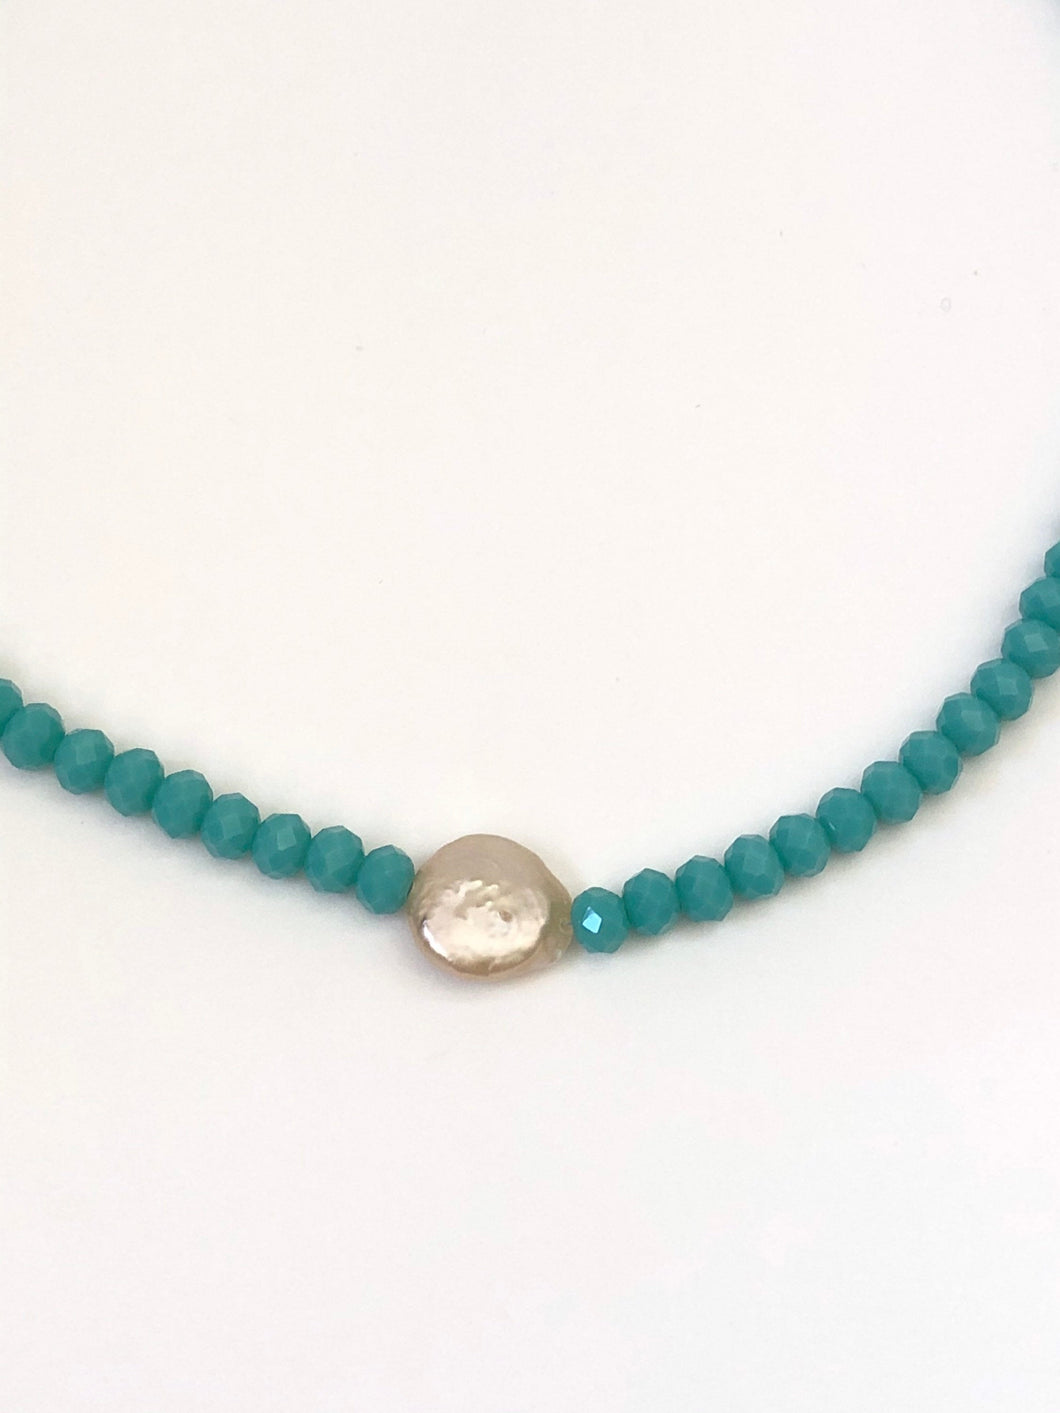 Sand Dollar Pearl Choker Necklace With Aqua Beads